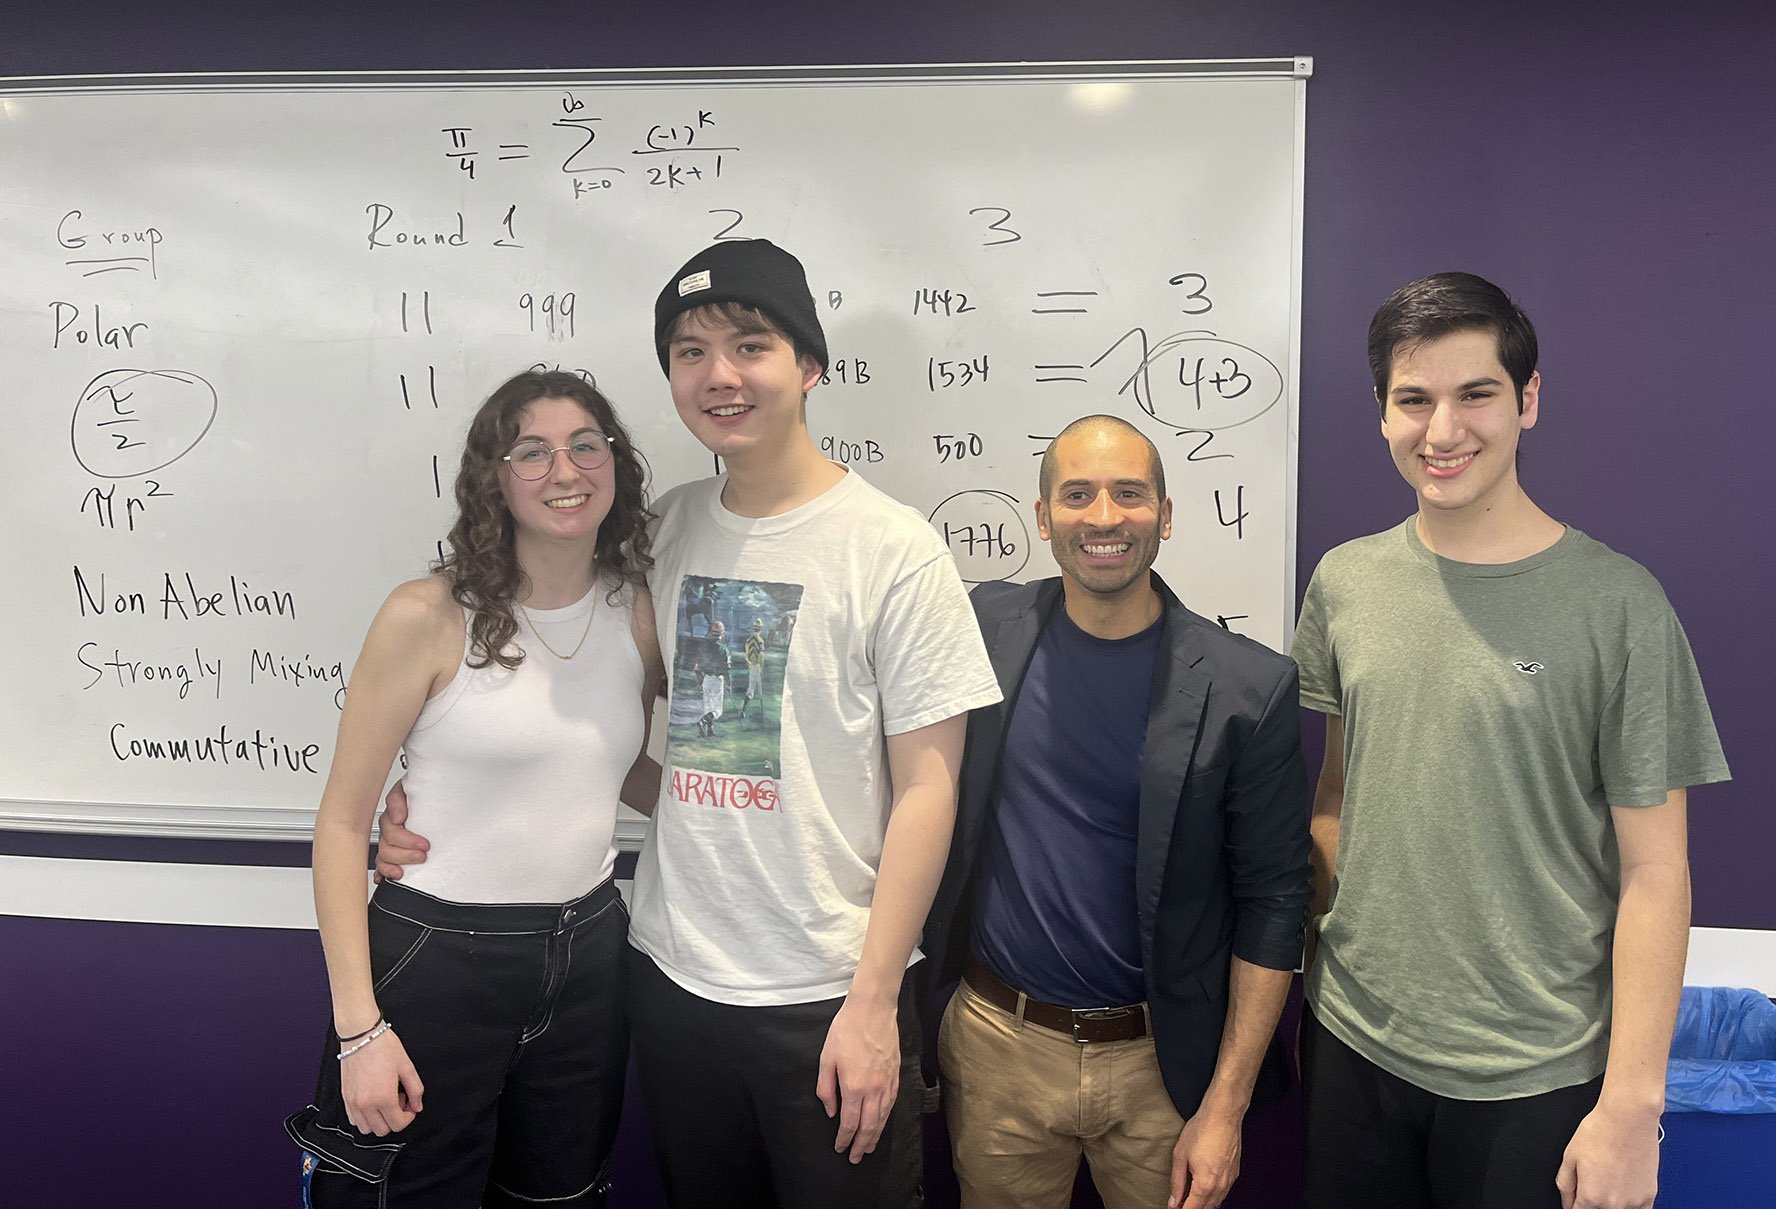 Students and a professor stand in front of a whiteboard with mathematical equations on it.